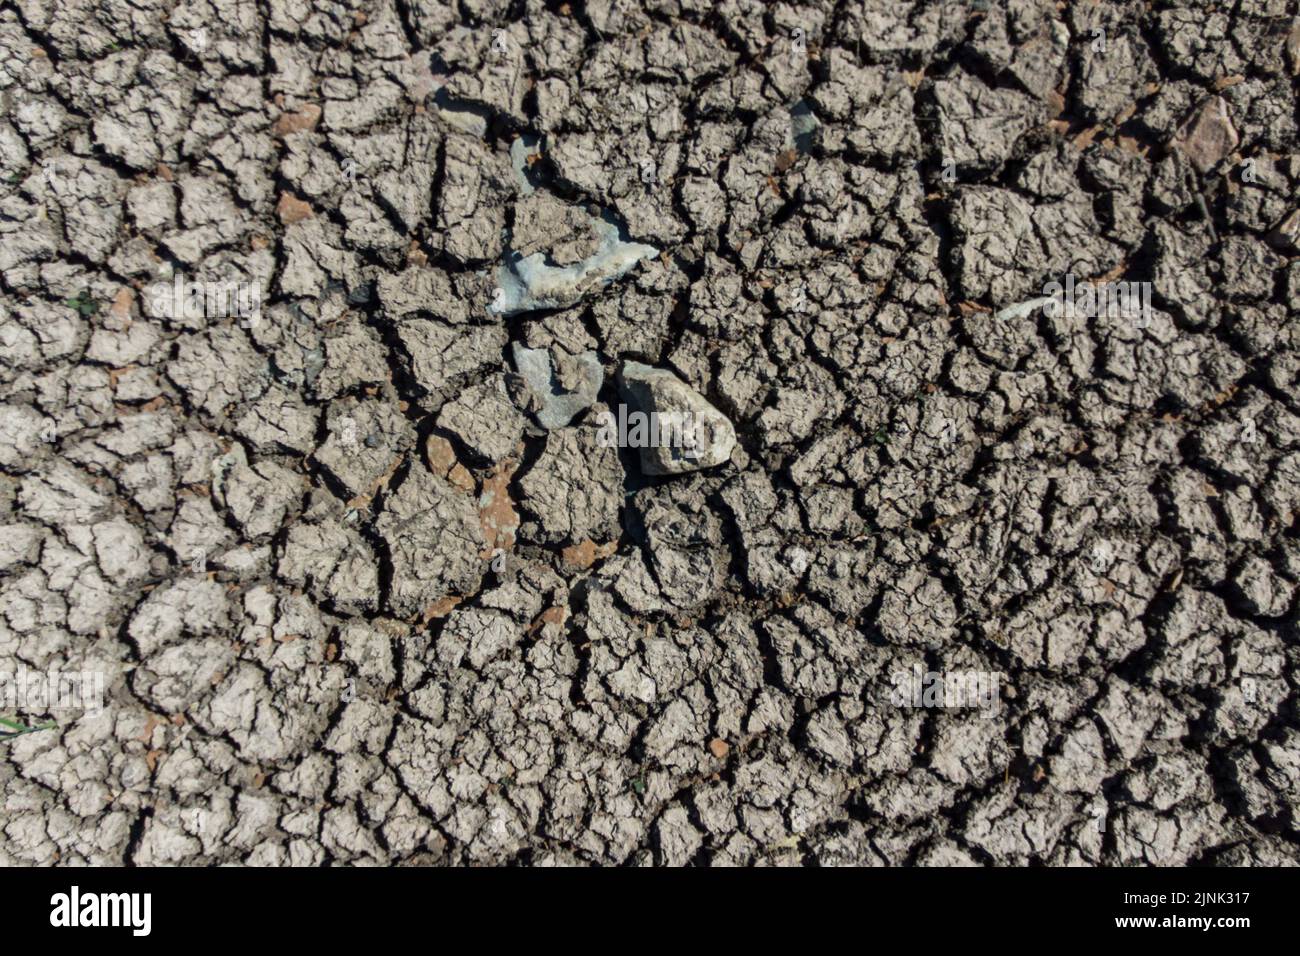 Forthampton, Gloucestershire August 12th 2022 - Cracked dry mud void of water in a pond in the small historic hamlet of Forthampton in Gloucestershire which has been hit hard by drought conditions. Credit: SCOTT CM/Alamy Live News Stock Photo